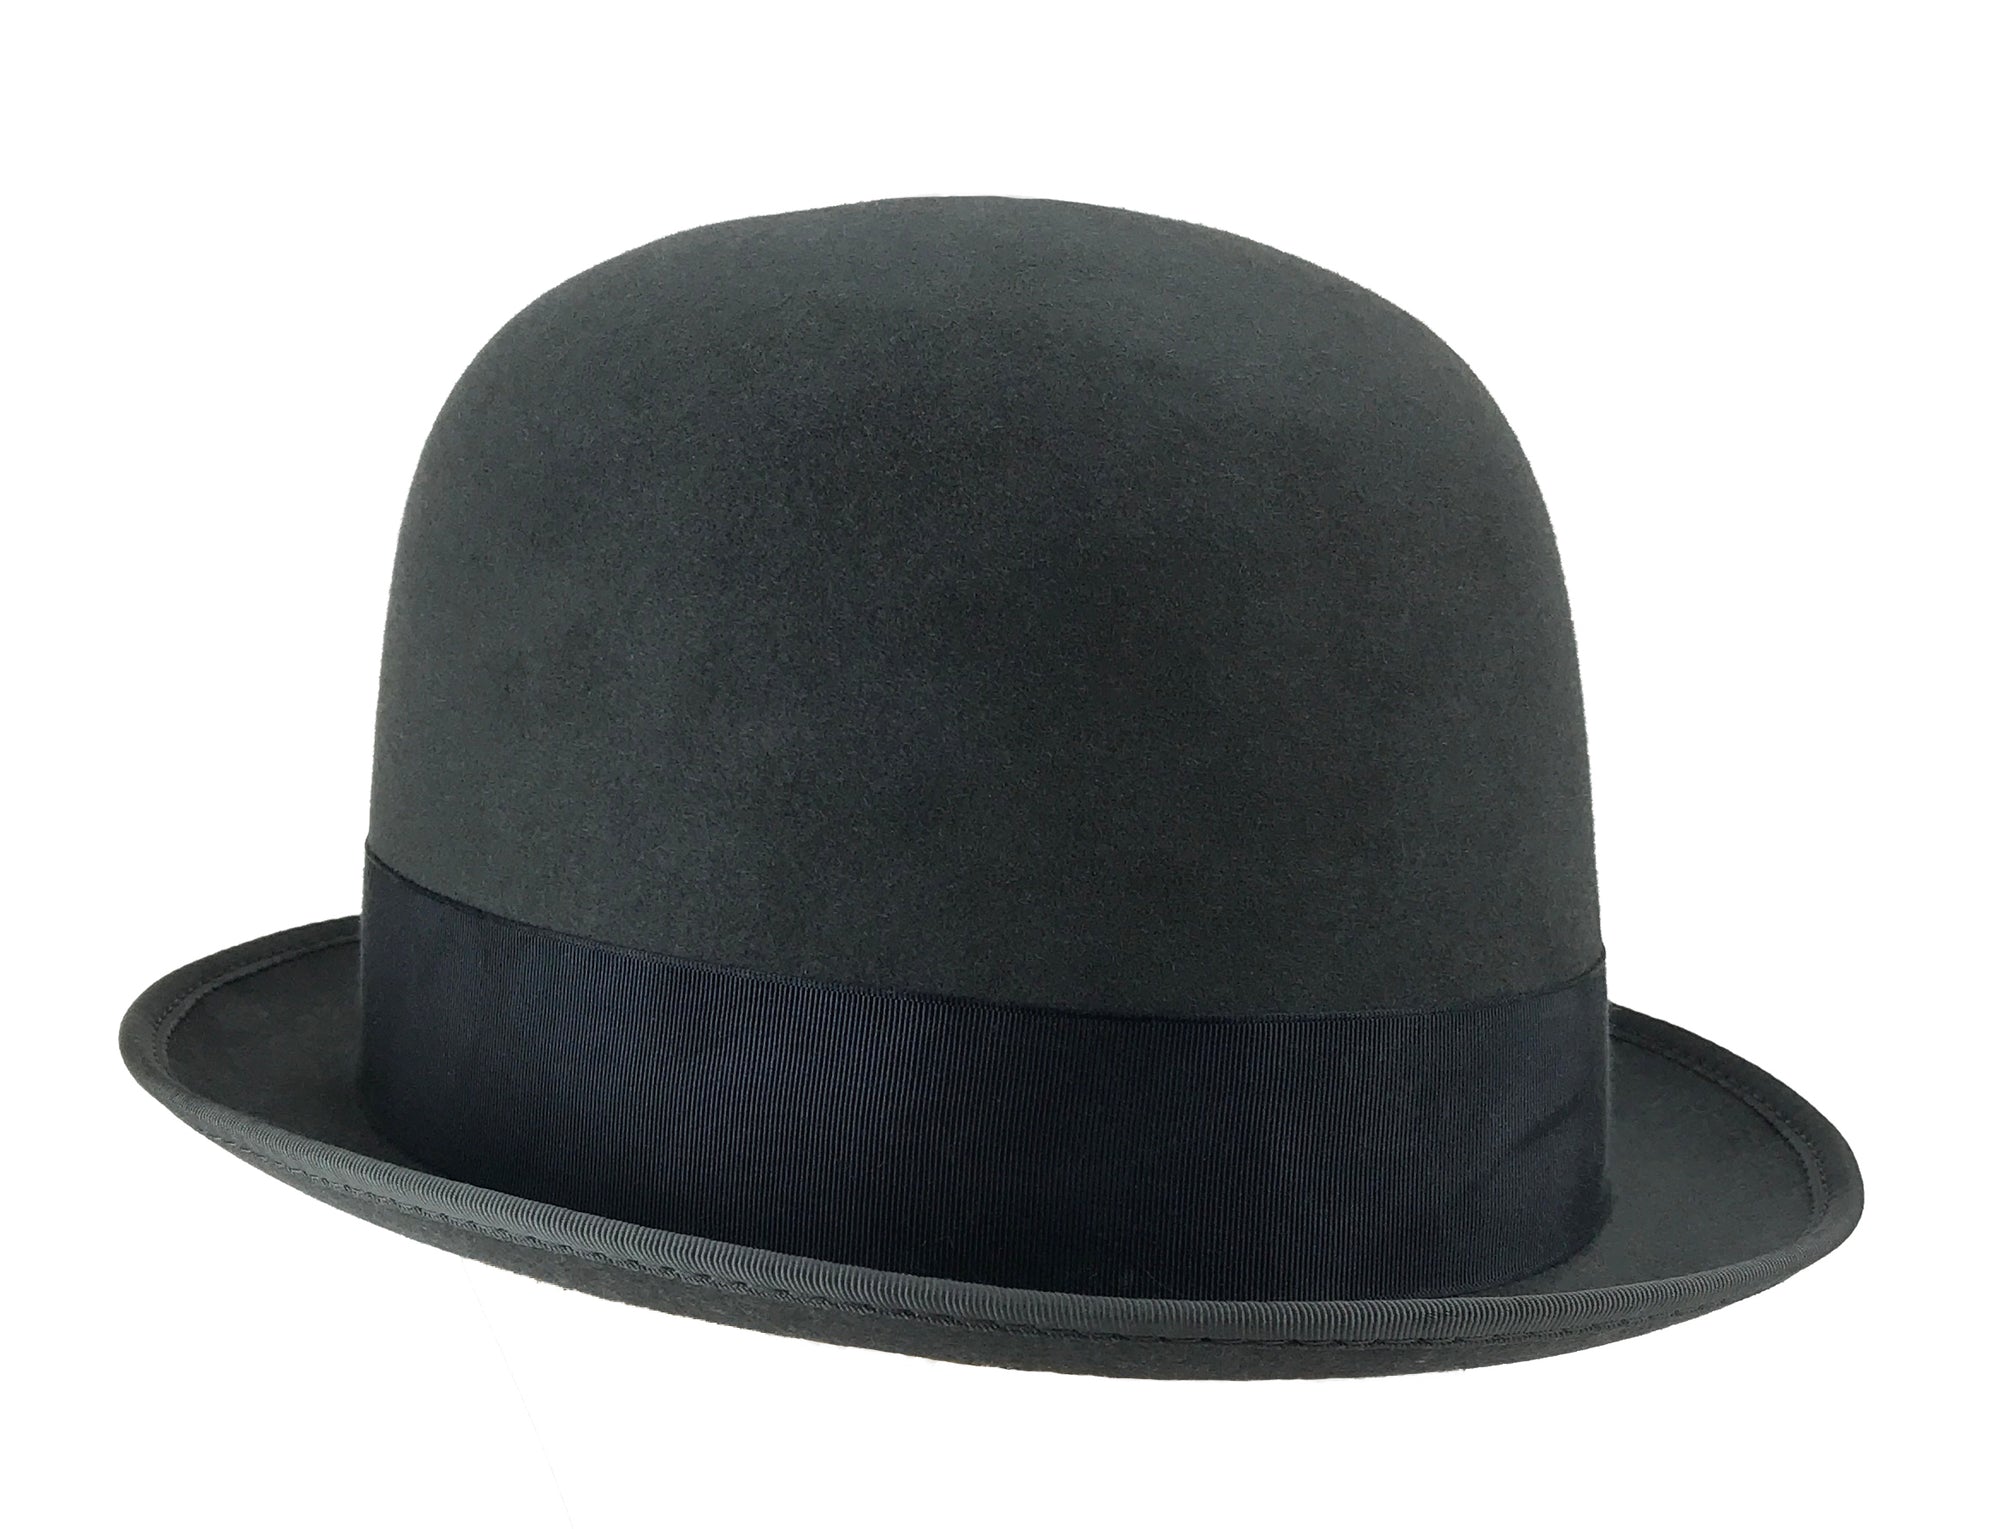 hatWRKS original 'downtown derby' with grosgrain ribbon and feather accent